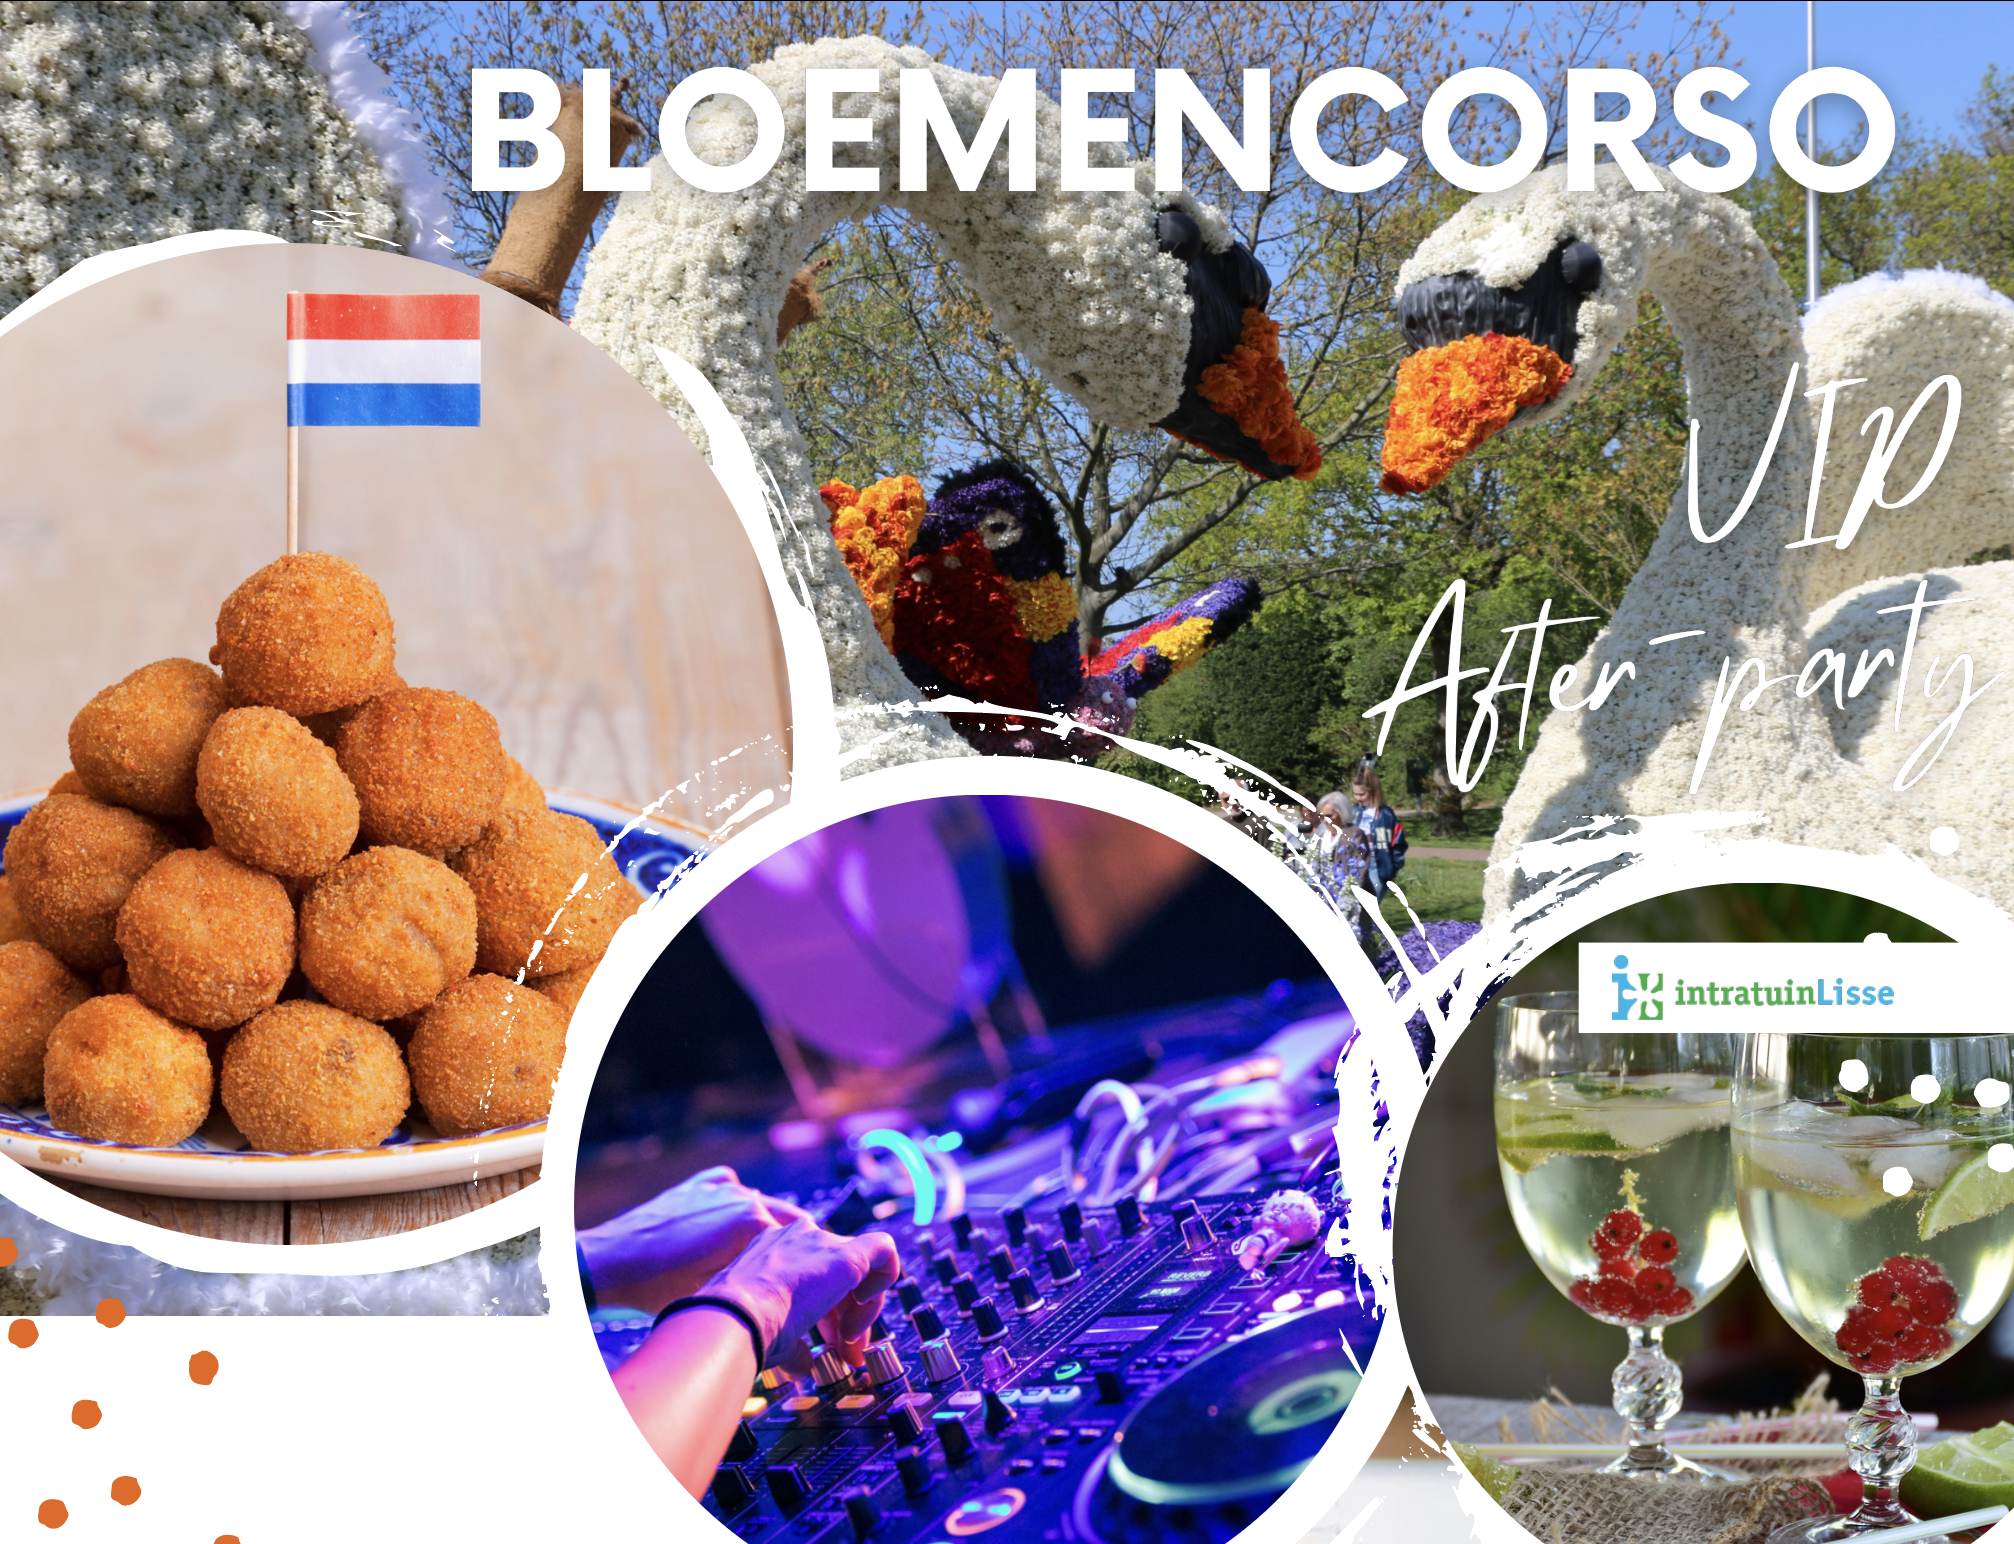 Bloemencorso VIP After Party